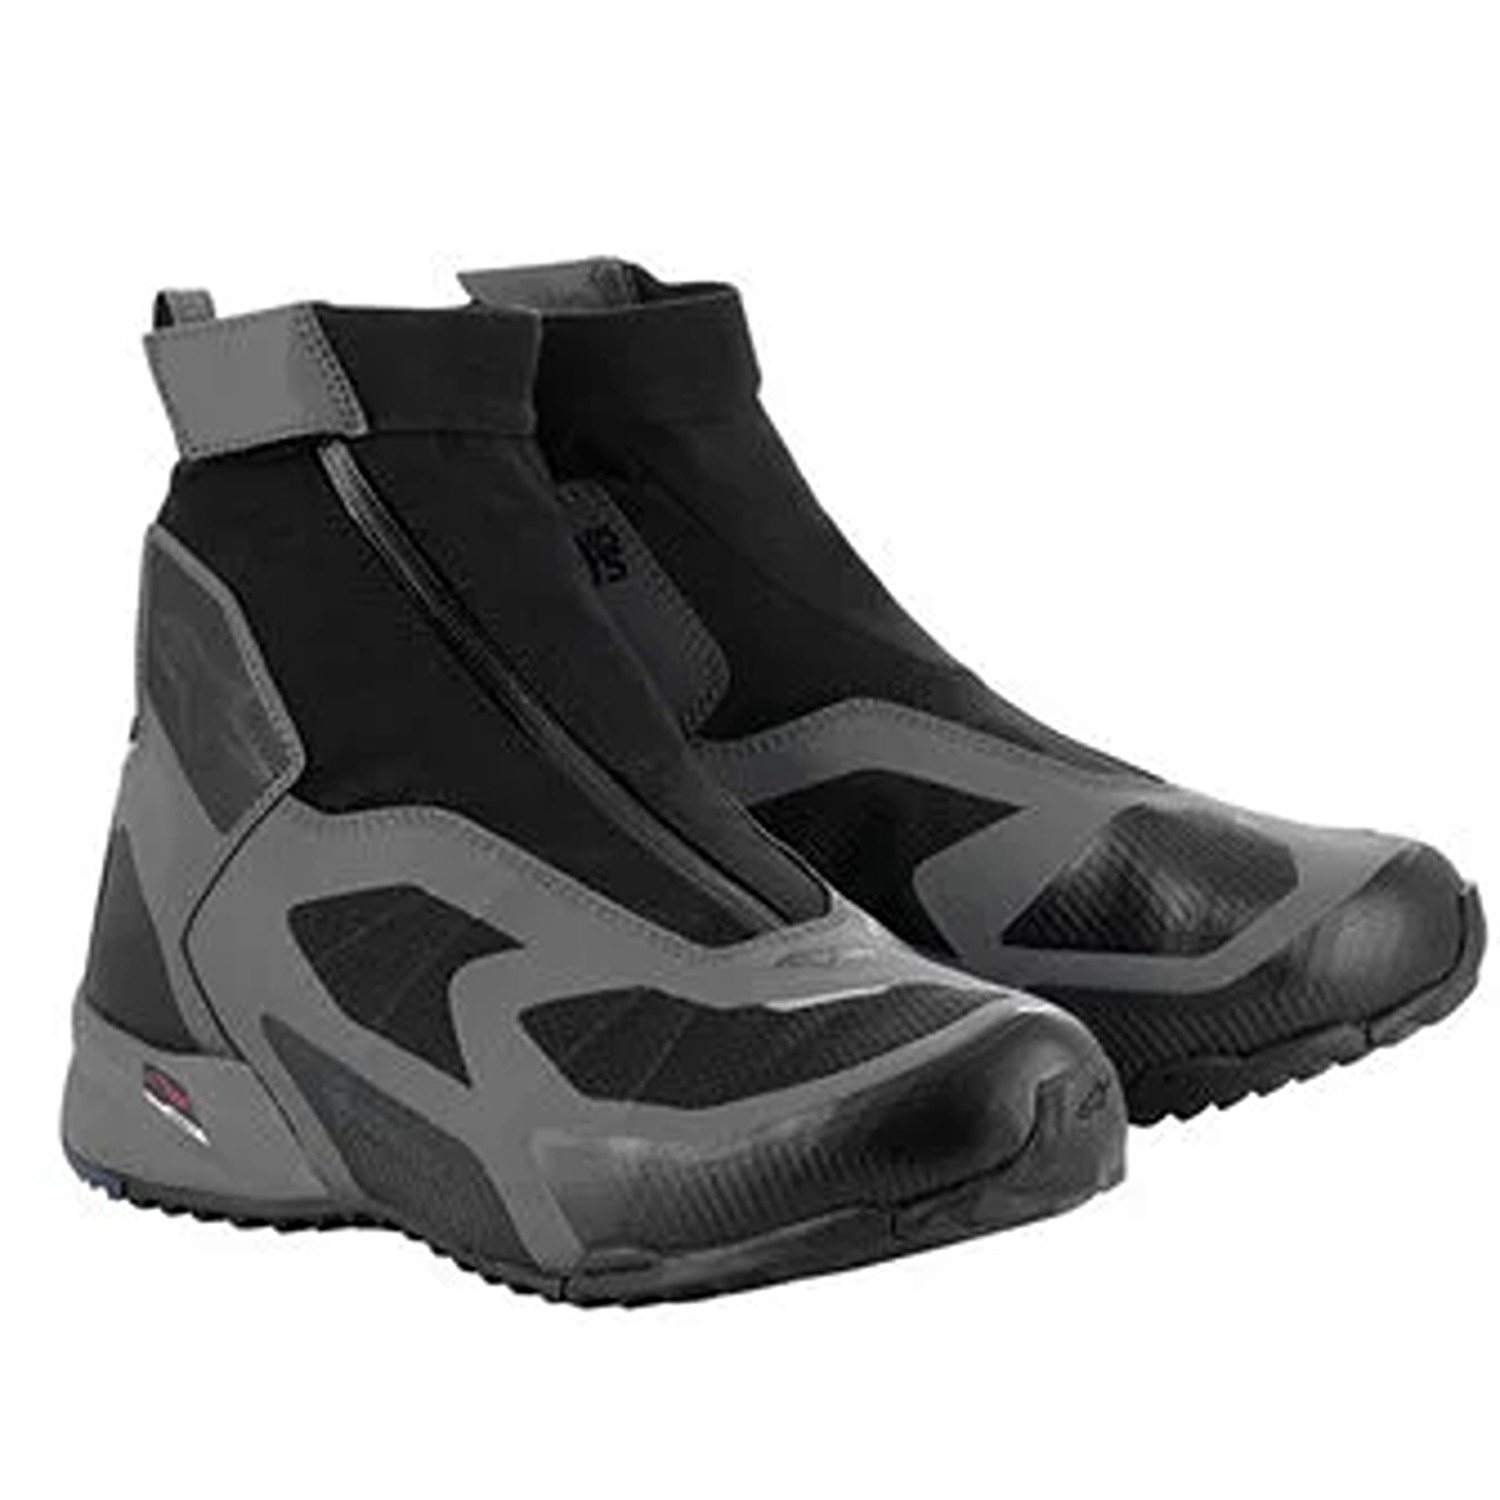 Image of Alpinestars CR-8 Gore-Tex Shoes Black Mid Gray Bright Red Size US 105 ID 8059347260204